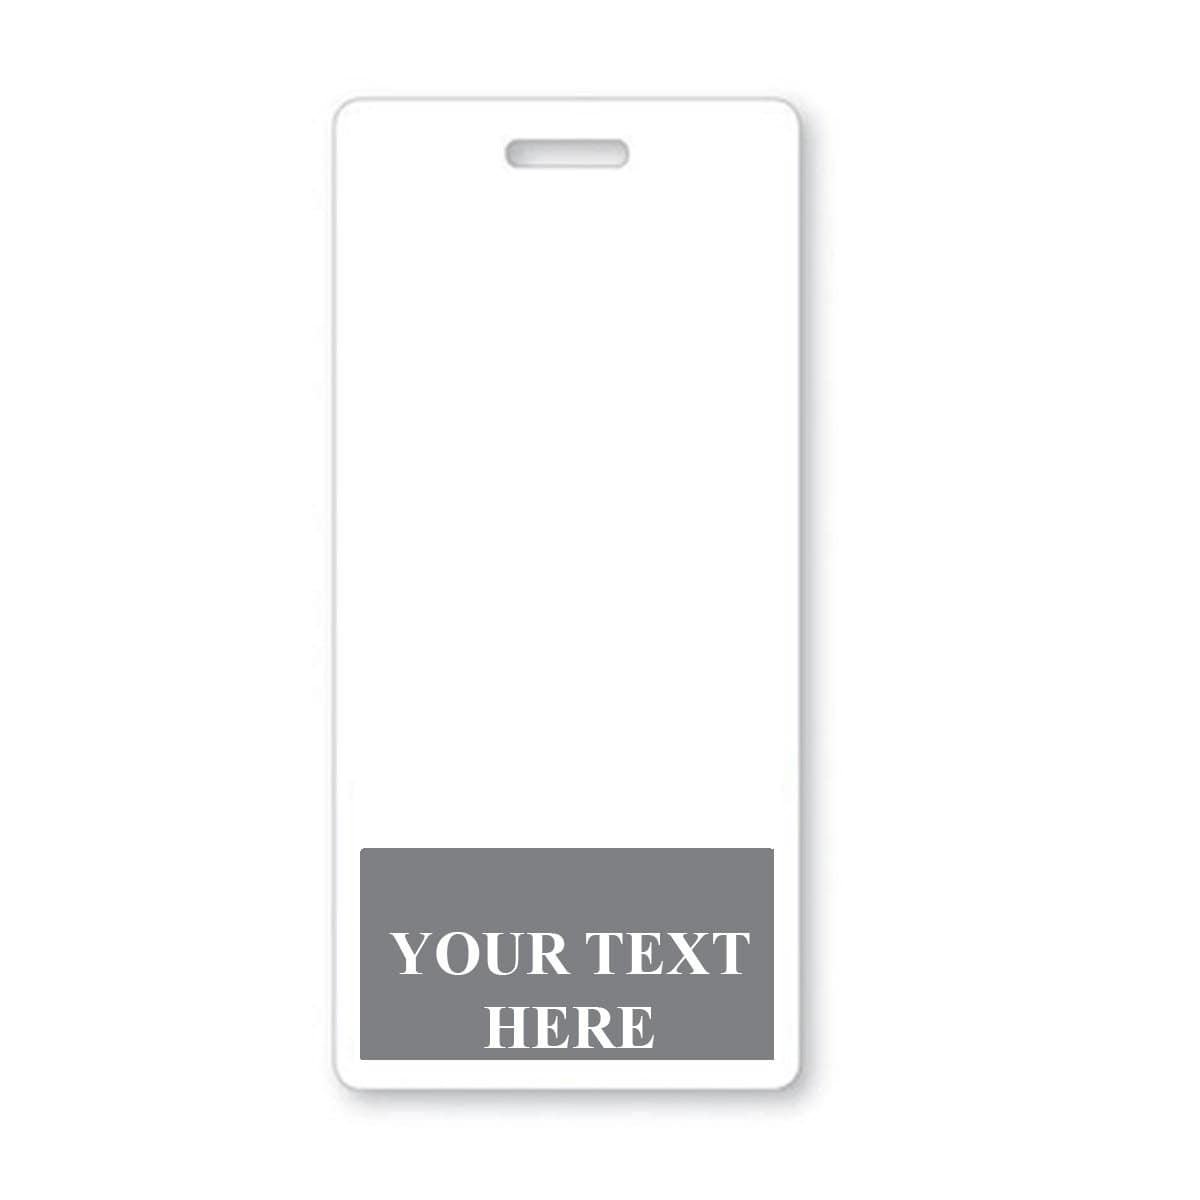 A vertical, rectangular white badge with a horizontal slot at the top for attachment. The gray box at the bottom contains the words "YOUR TEXT HERE." Ideal for identification badges, this Custom Printed Badge Buddy Vertical (Standard Size) ensures instant role recognition.